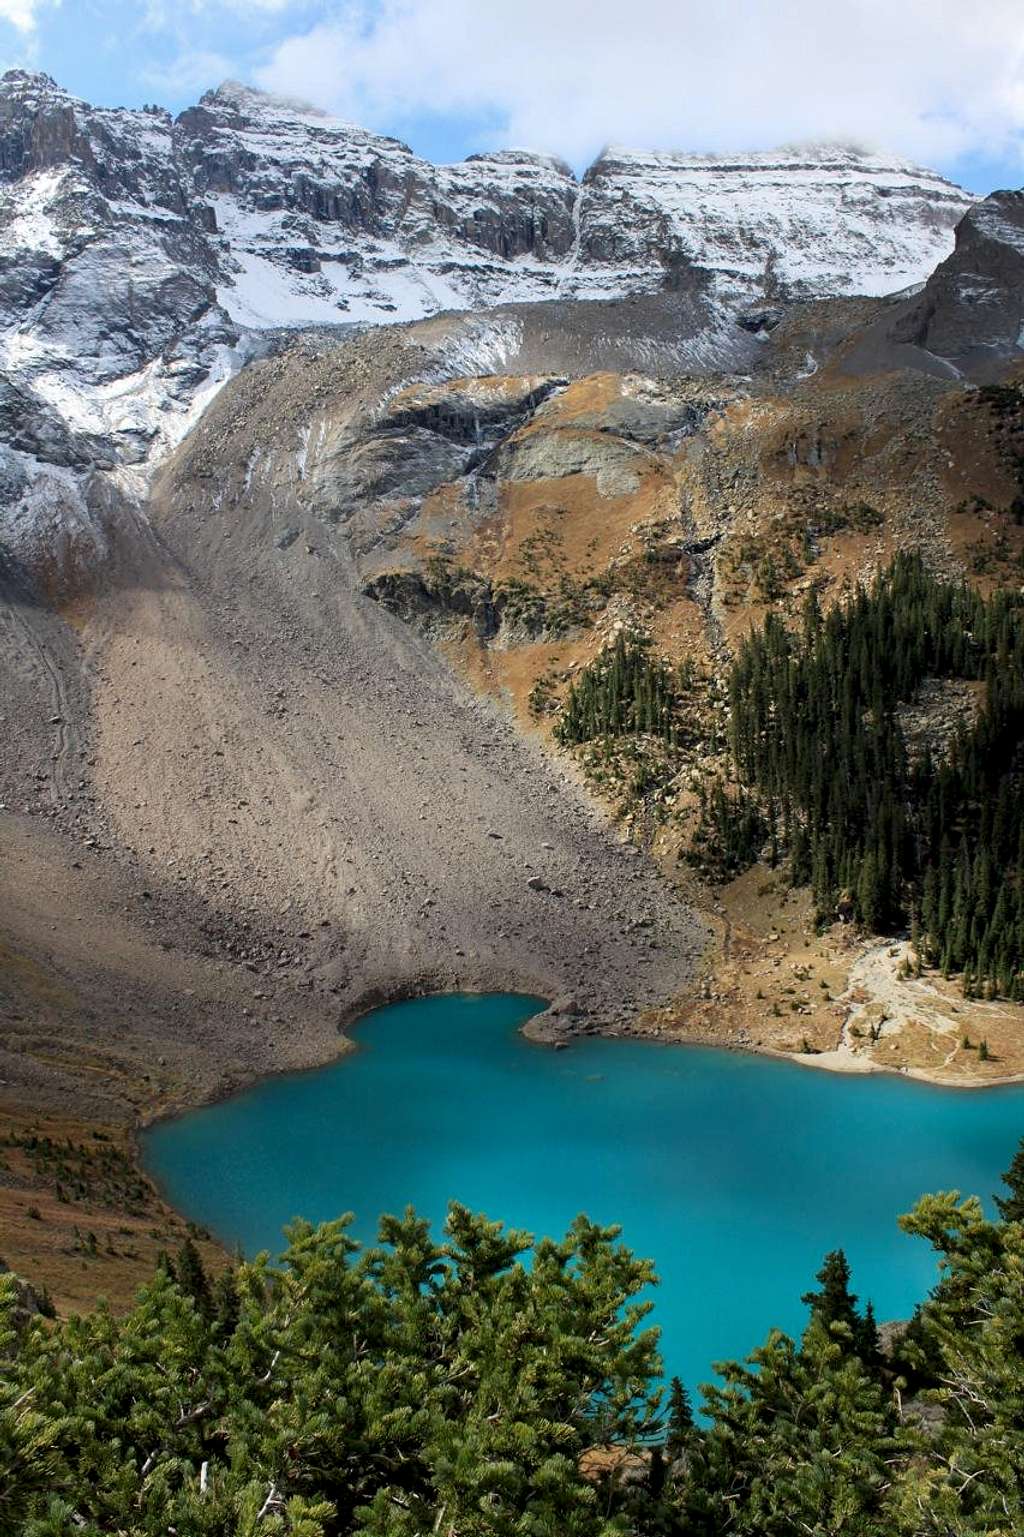 The Lowest Blue Lake